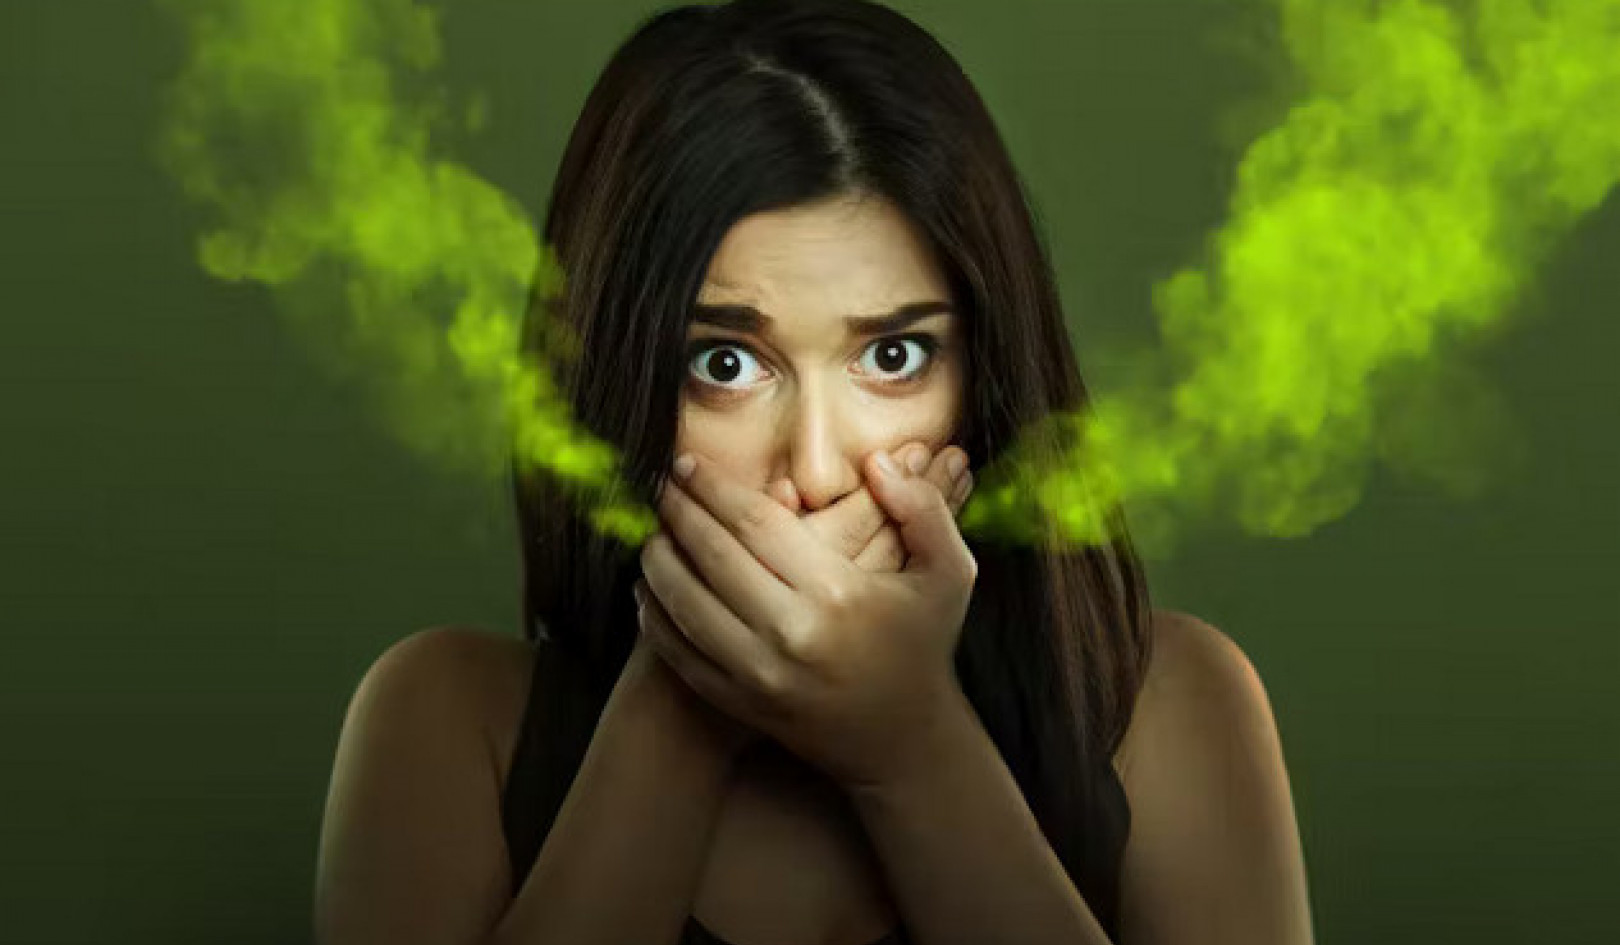 Thee 7 Strange Things Can Cause Bad Breath